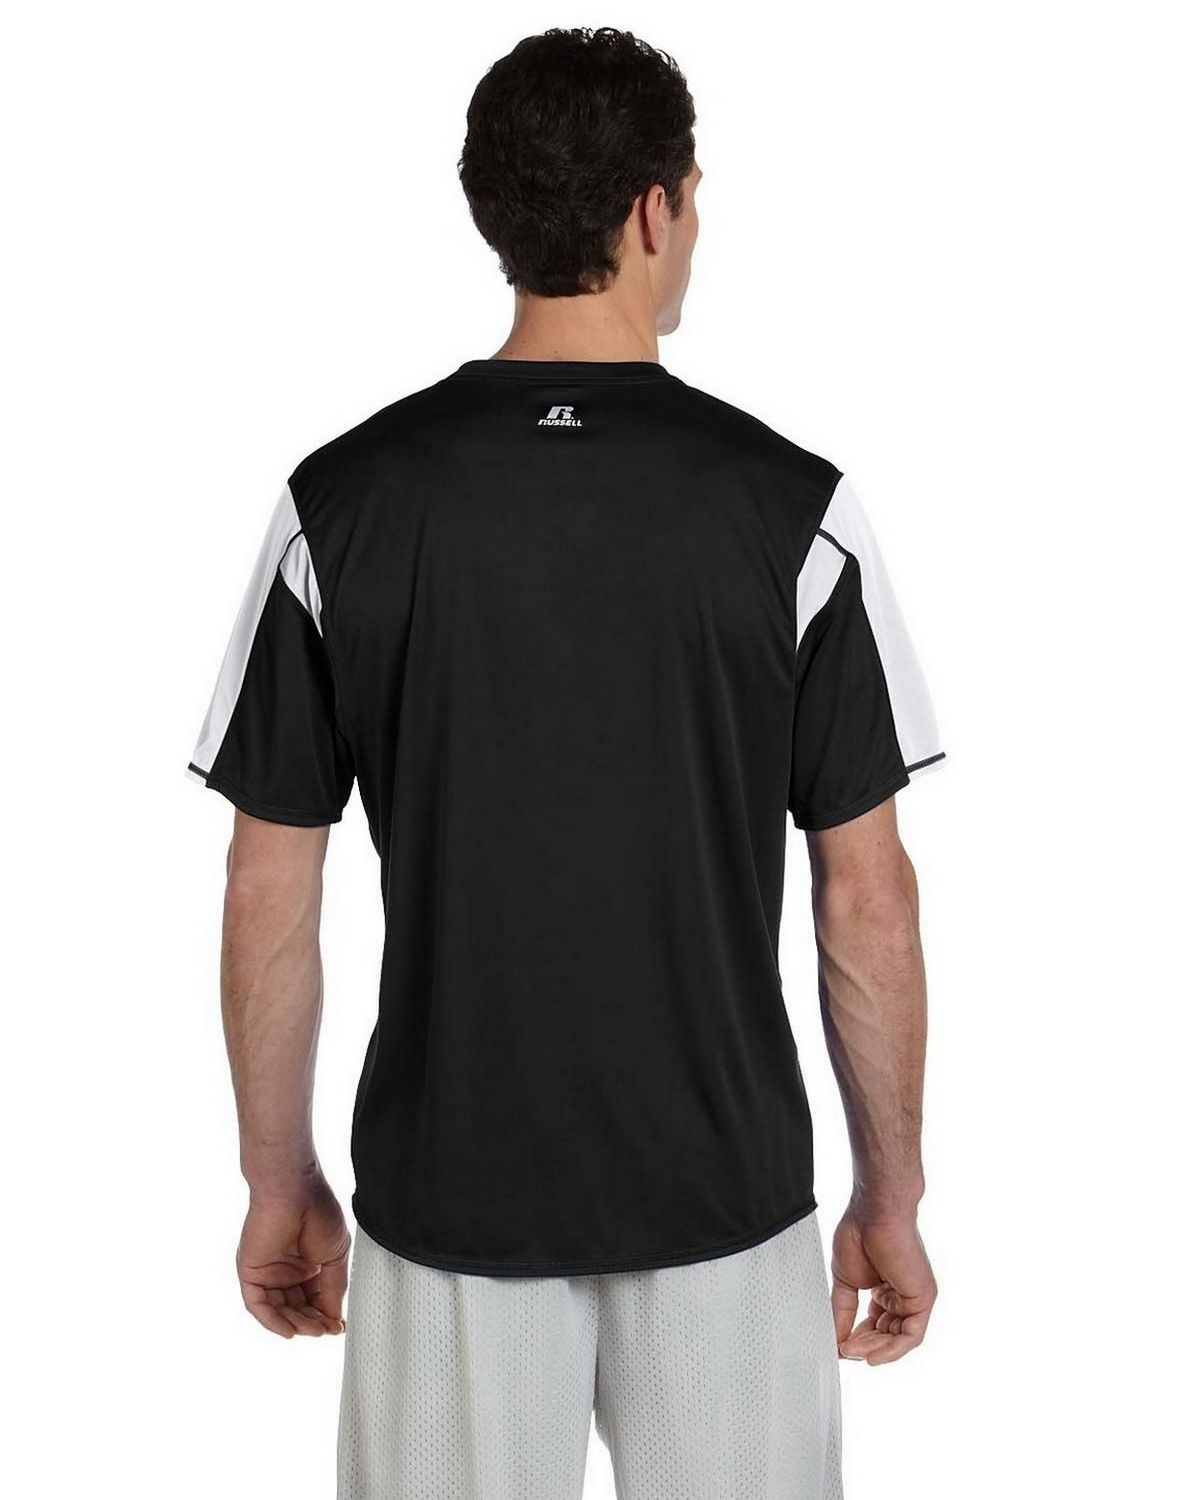 Russell Athletic Mens Performance T-Shirt